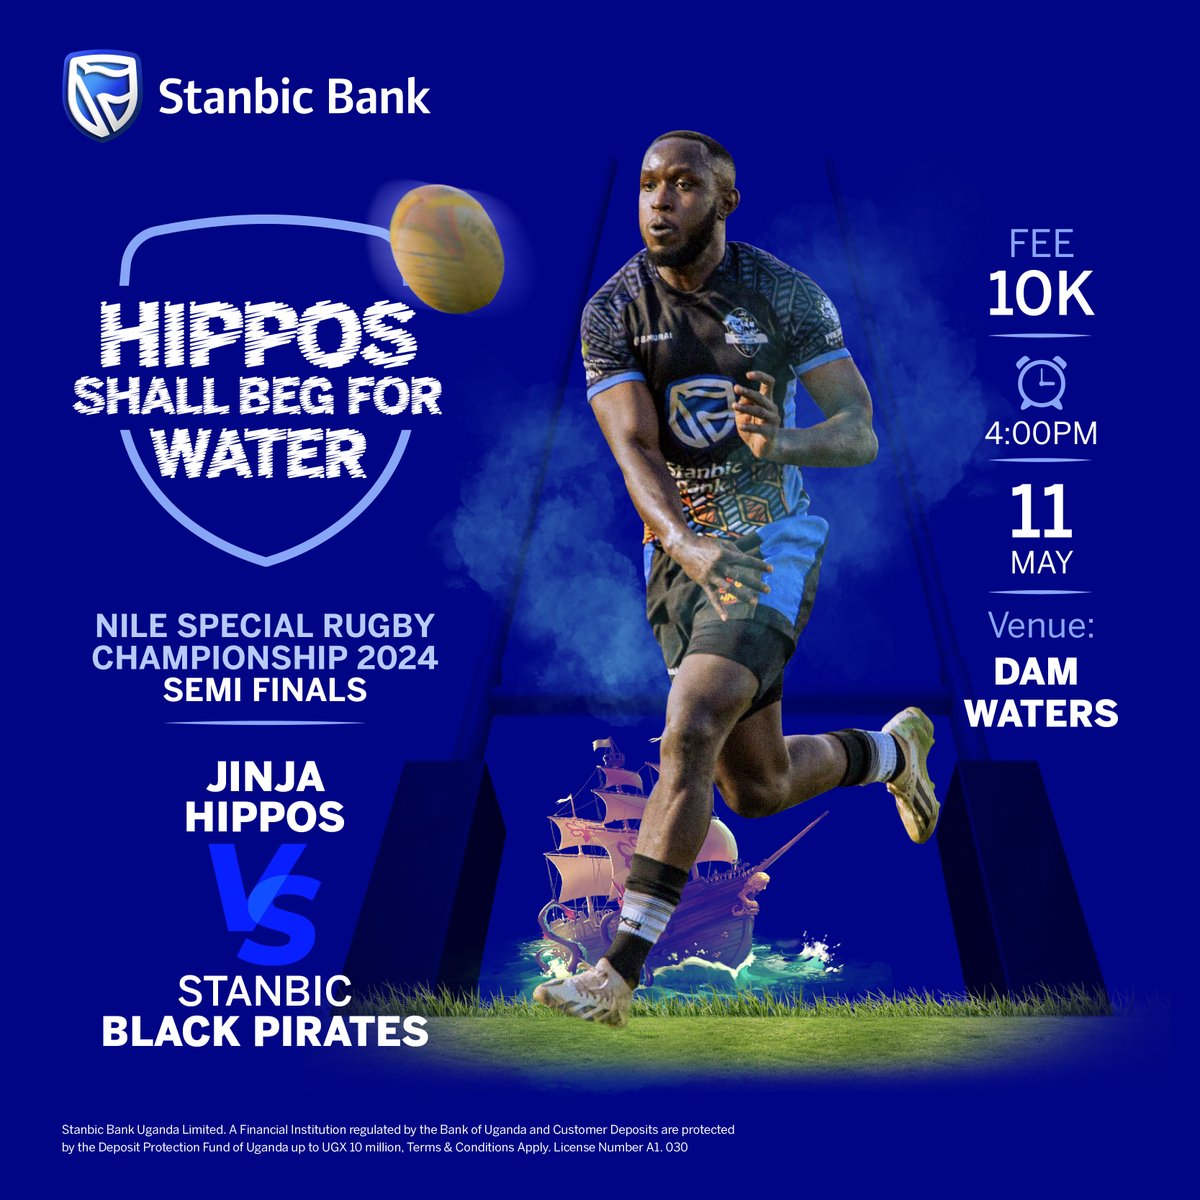 𝐆𝐚𝐦𝐞𝐃𝐚𝐲: Brace yourselves for a spectacle of the #StanbicPirates prowess. Let's go Pirates...